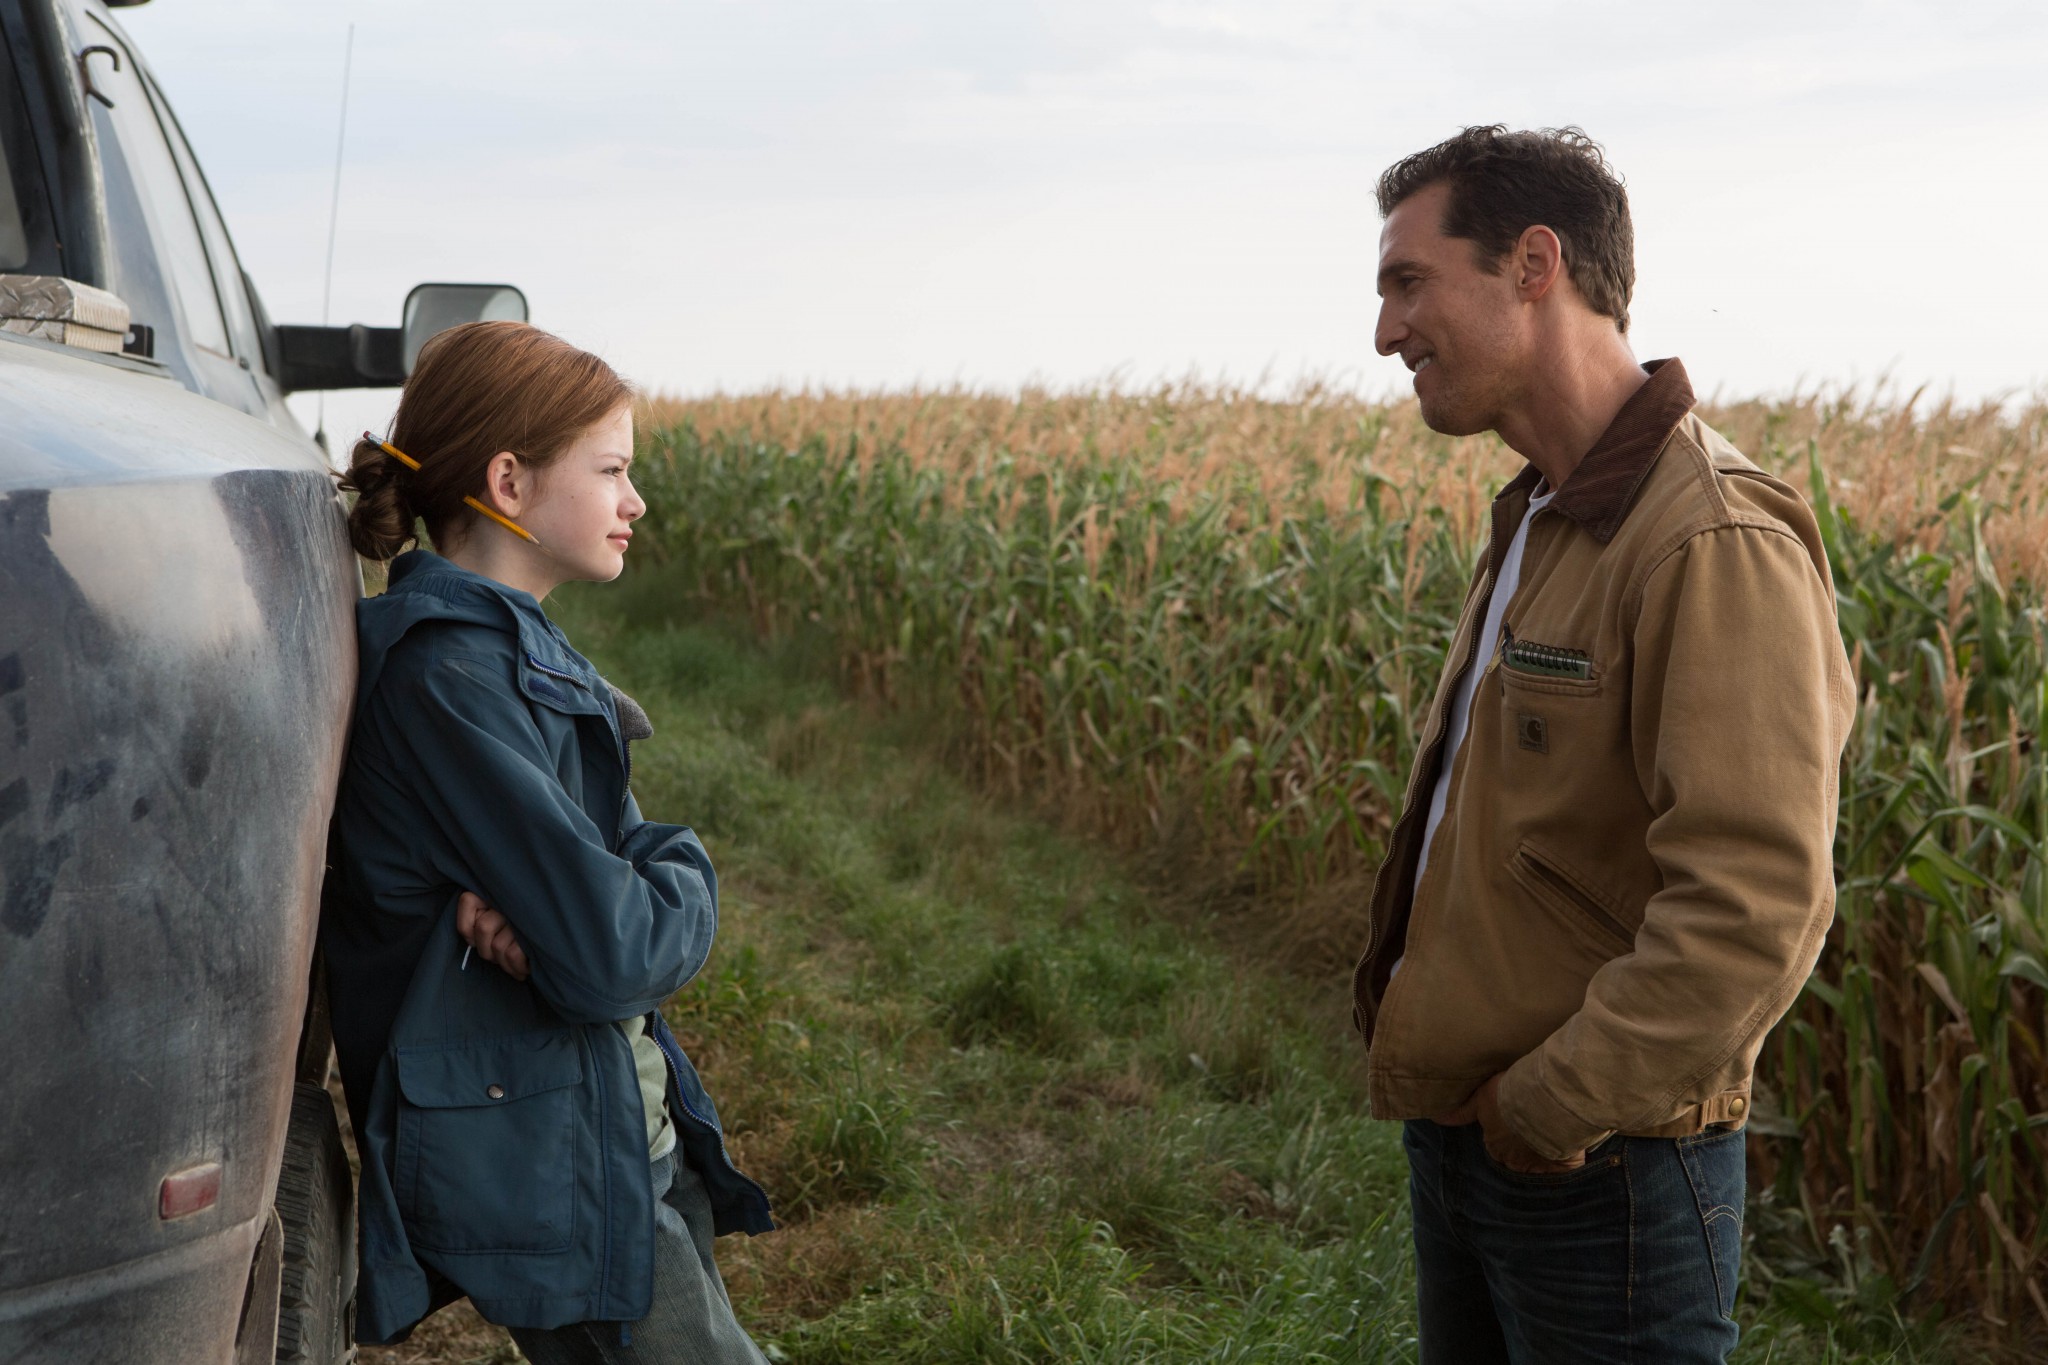 Left to right: Mackenzie Foy and Matthew McConaughey in INTERSTELLAR, from Paramount Pictures and Warner Brothers Entertainment.